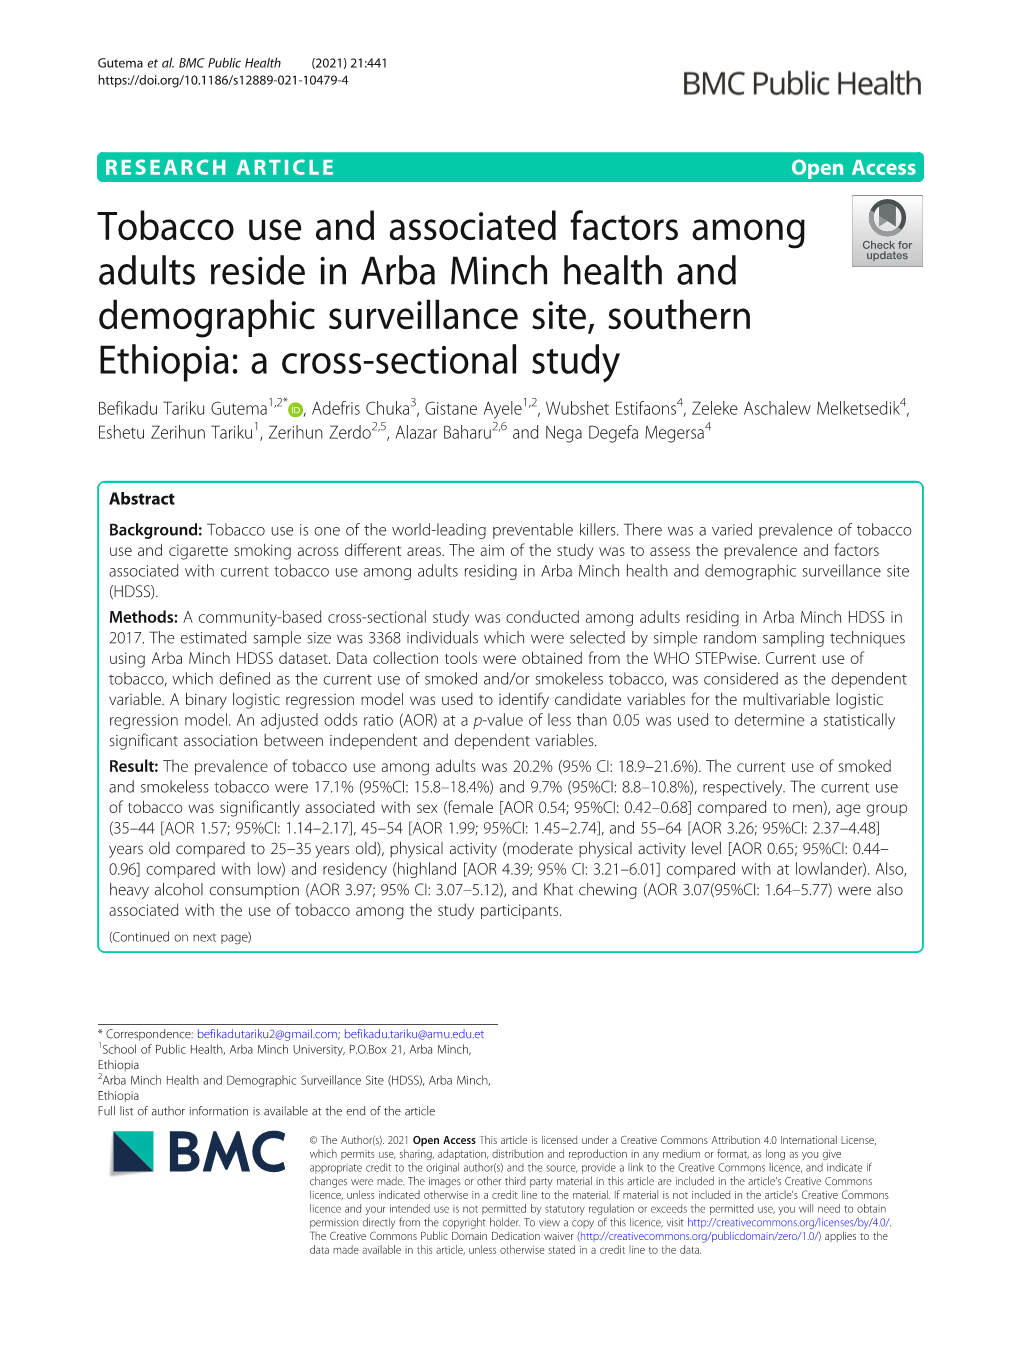 Tobacco Use and Associated Factors Among Adults Reside in Arba Minch